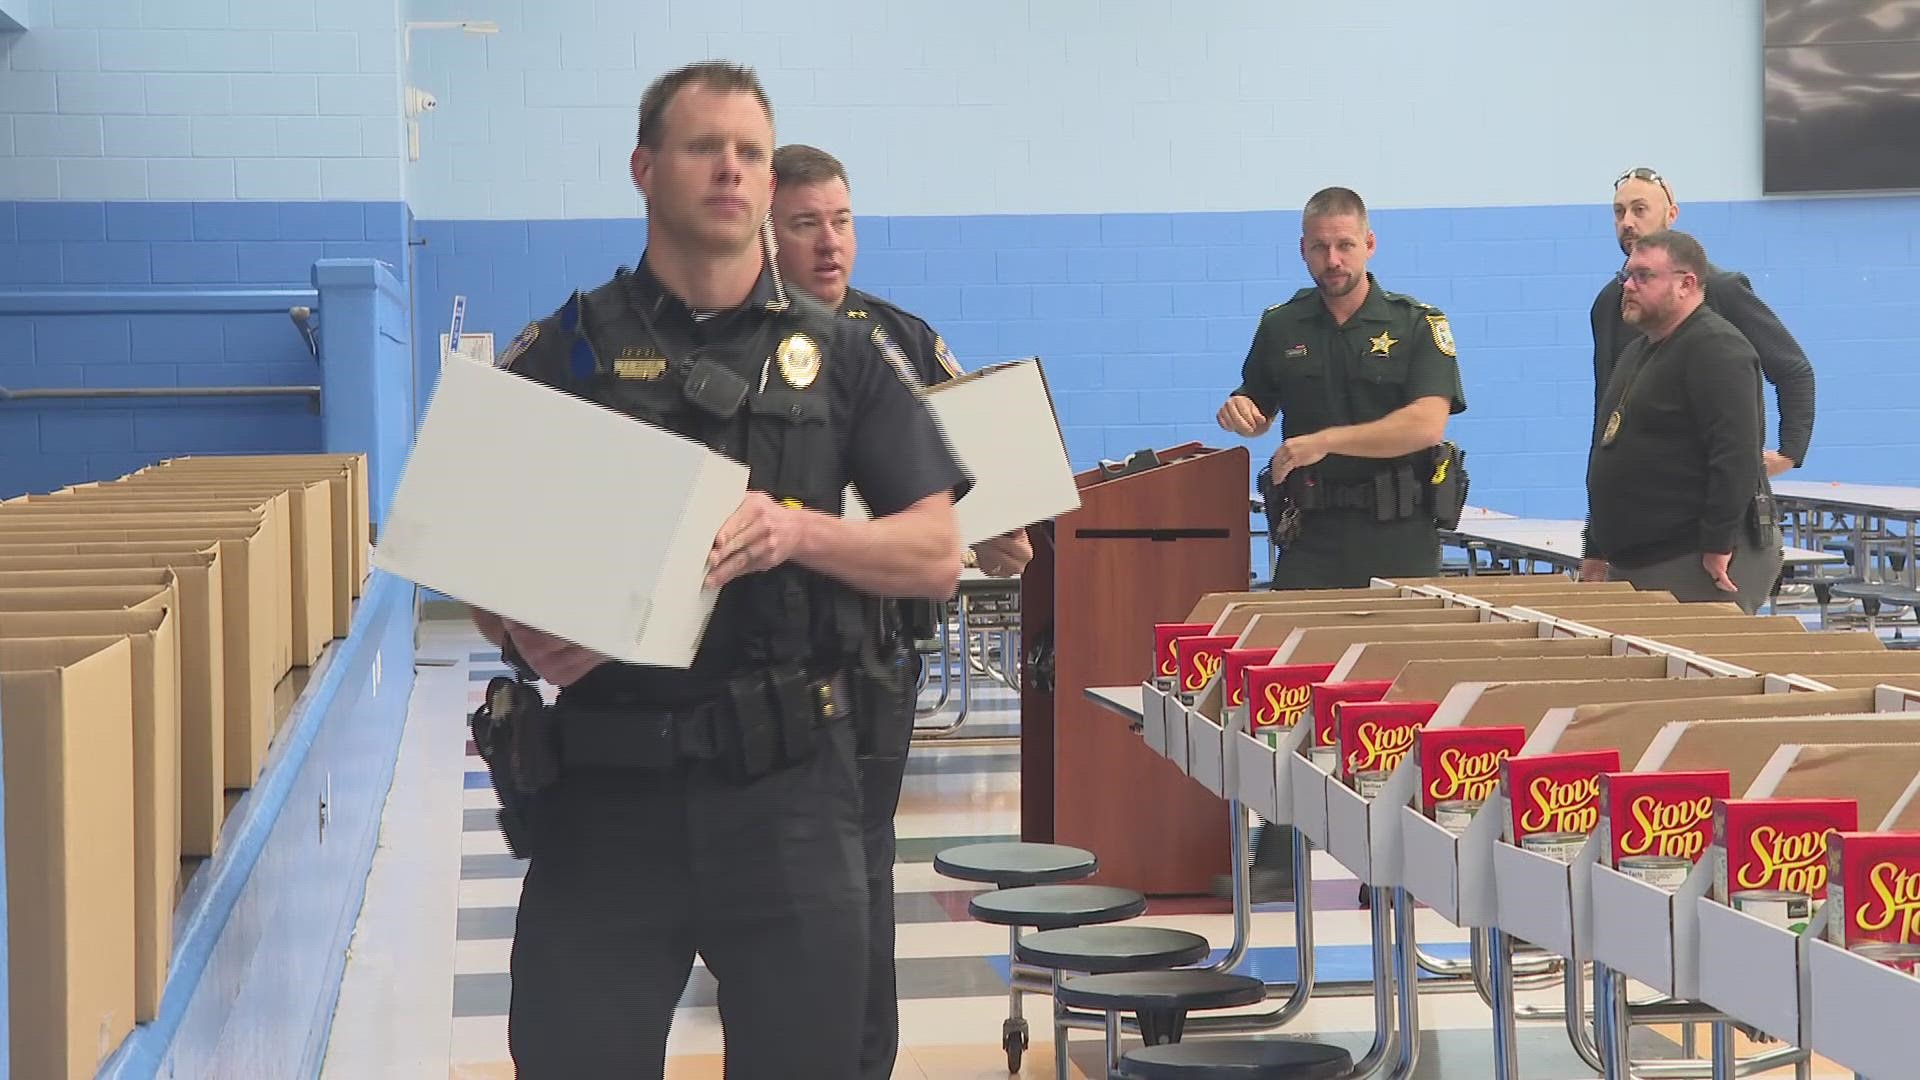 Deputies packed boxes filled with other food items and distributed them to senior citizens across the area.